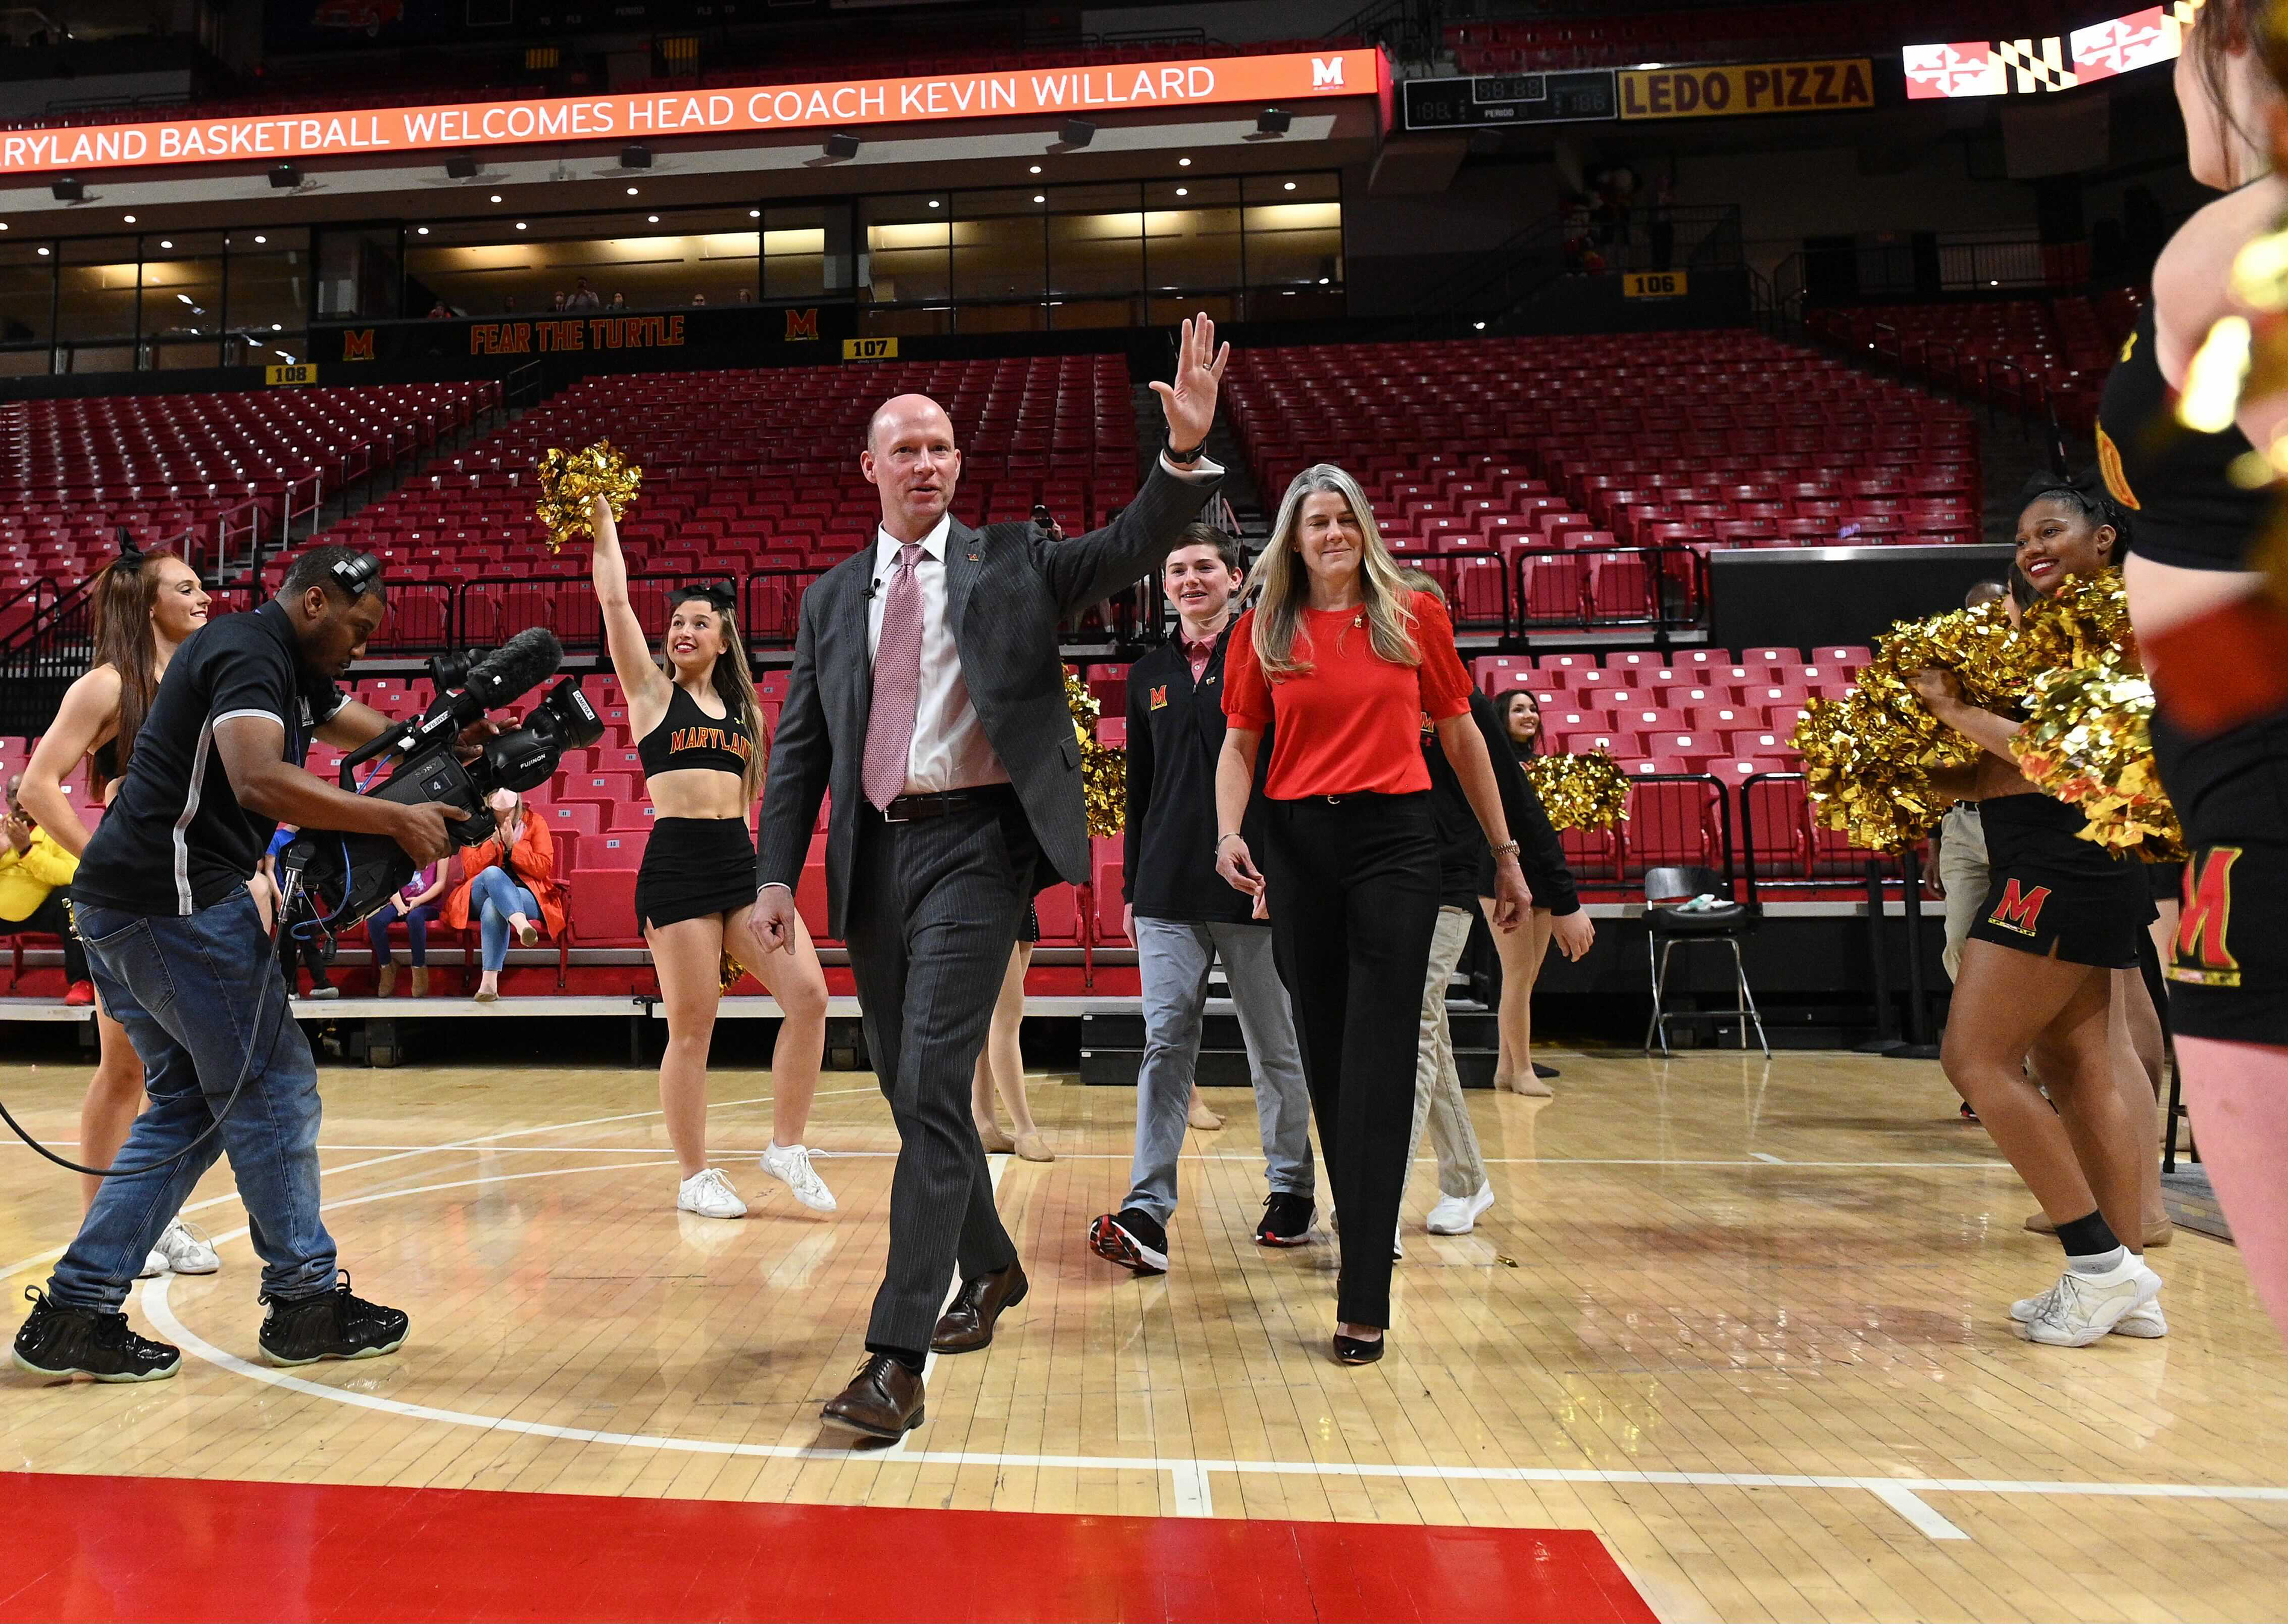 Kevin Willard left lasting impressions on road to becoming Maryland men's basketball  coach – Baltimore Sun